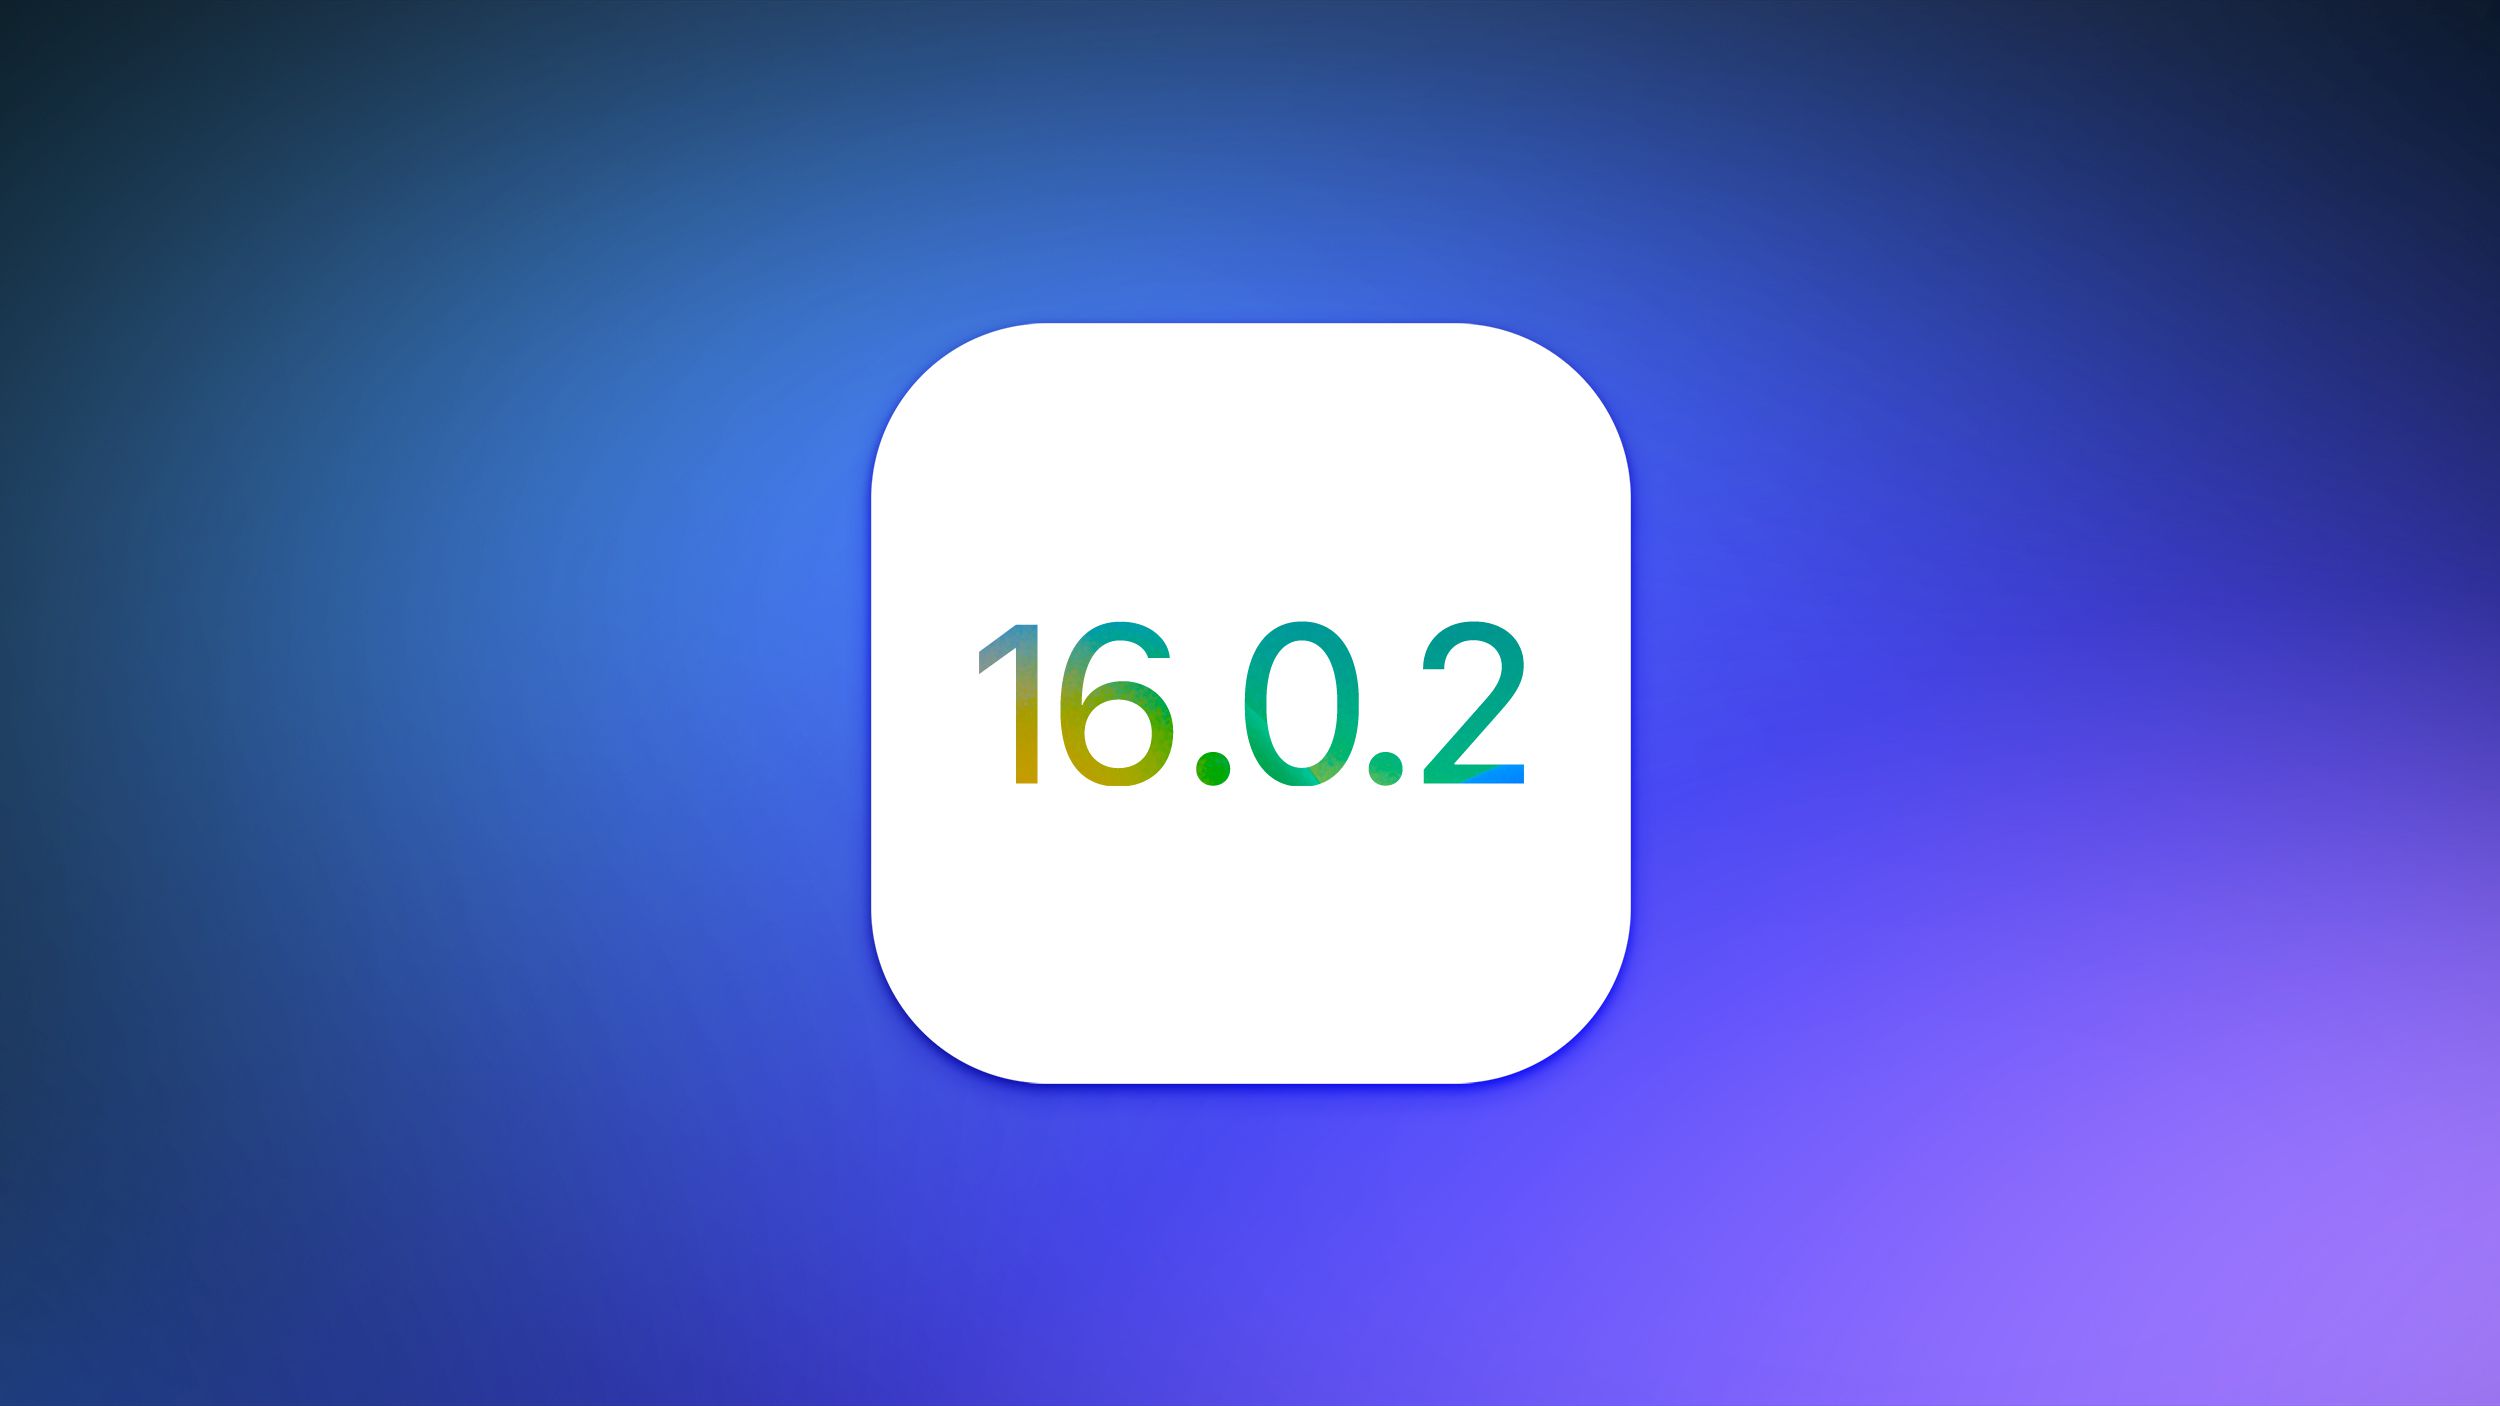 Apple today released iOS 16.0.2, addressing a number of bugs that iPhone 14 owners have been experiencing since the new devices launched. iOS 16.0.2 c